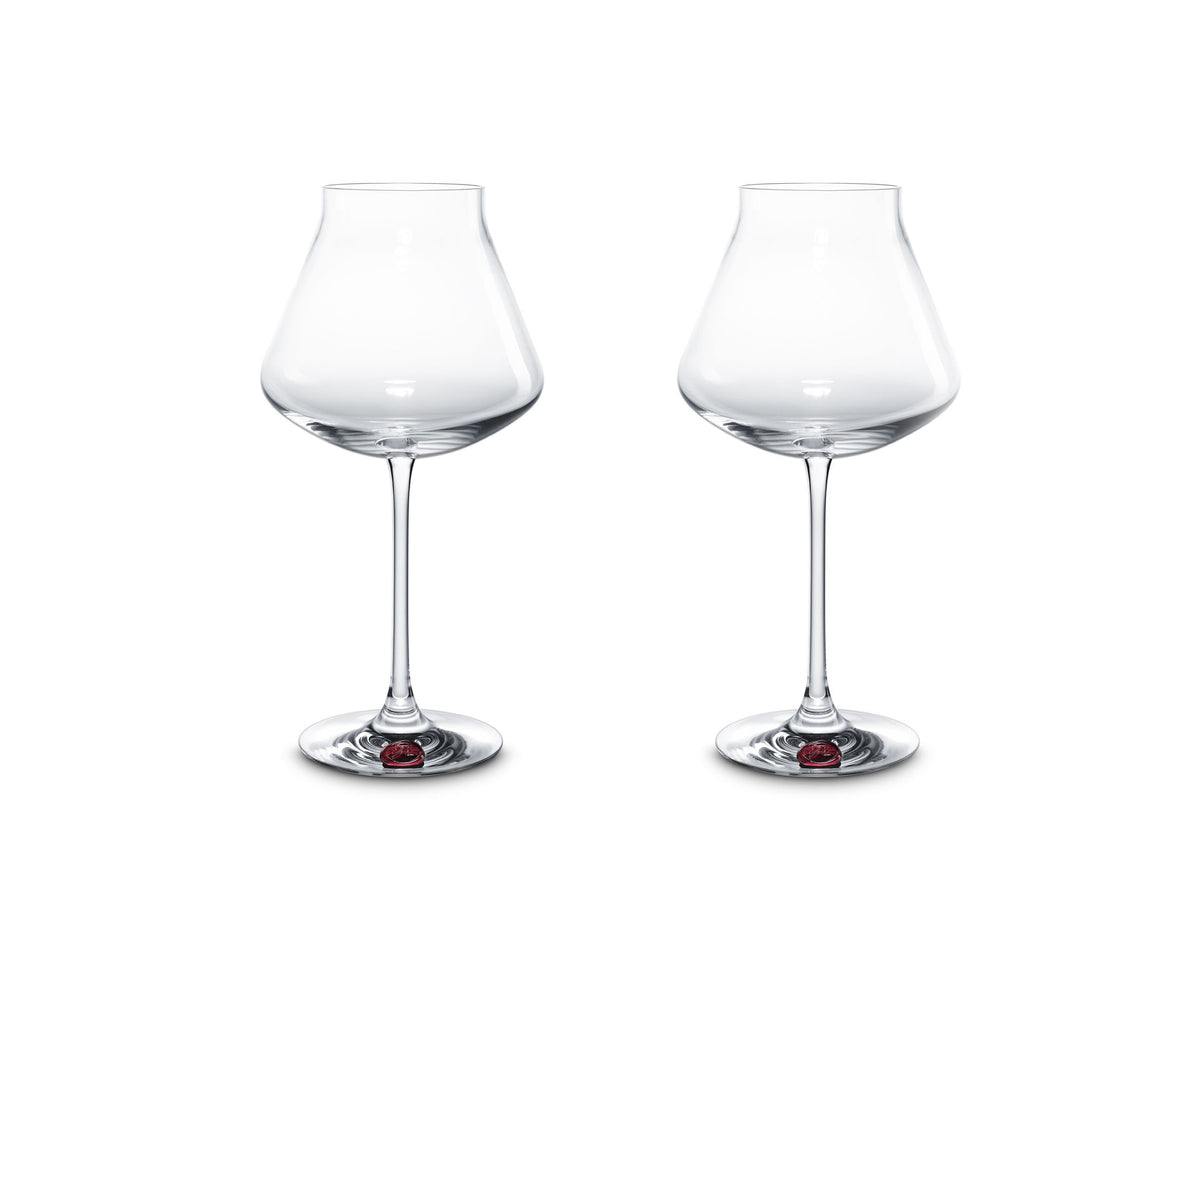 XL Chateau Baccarat w/Red Seal, Set of 2